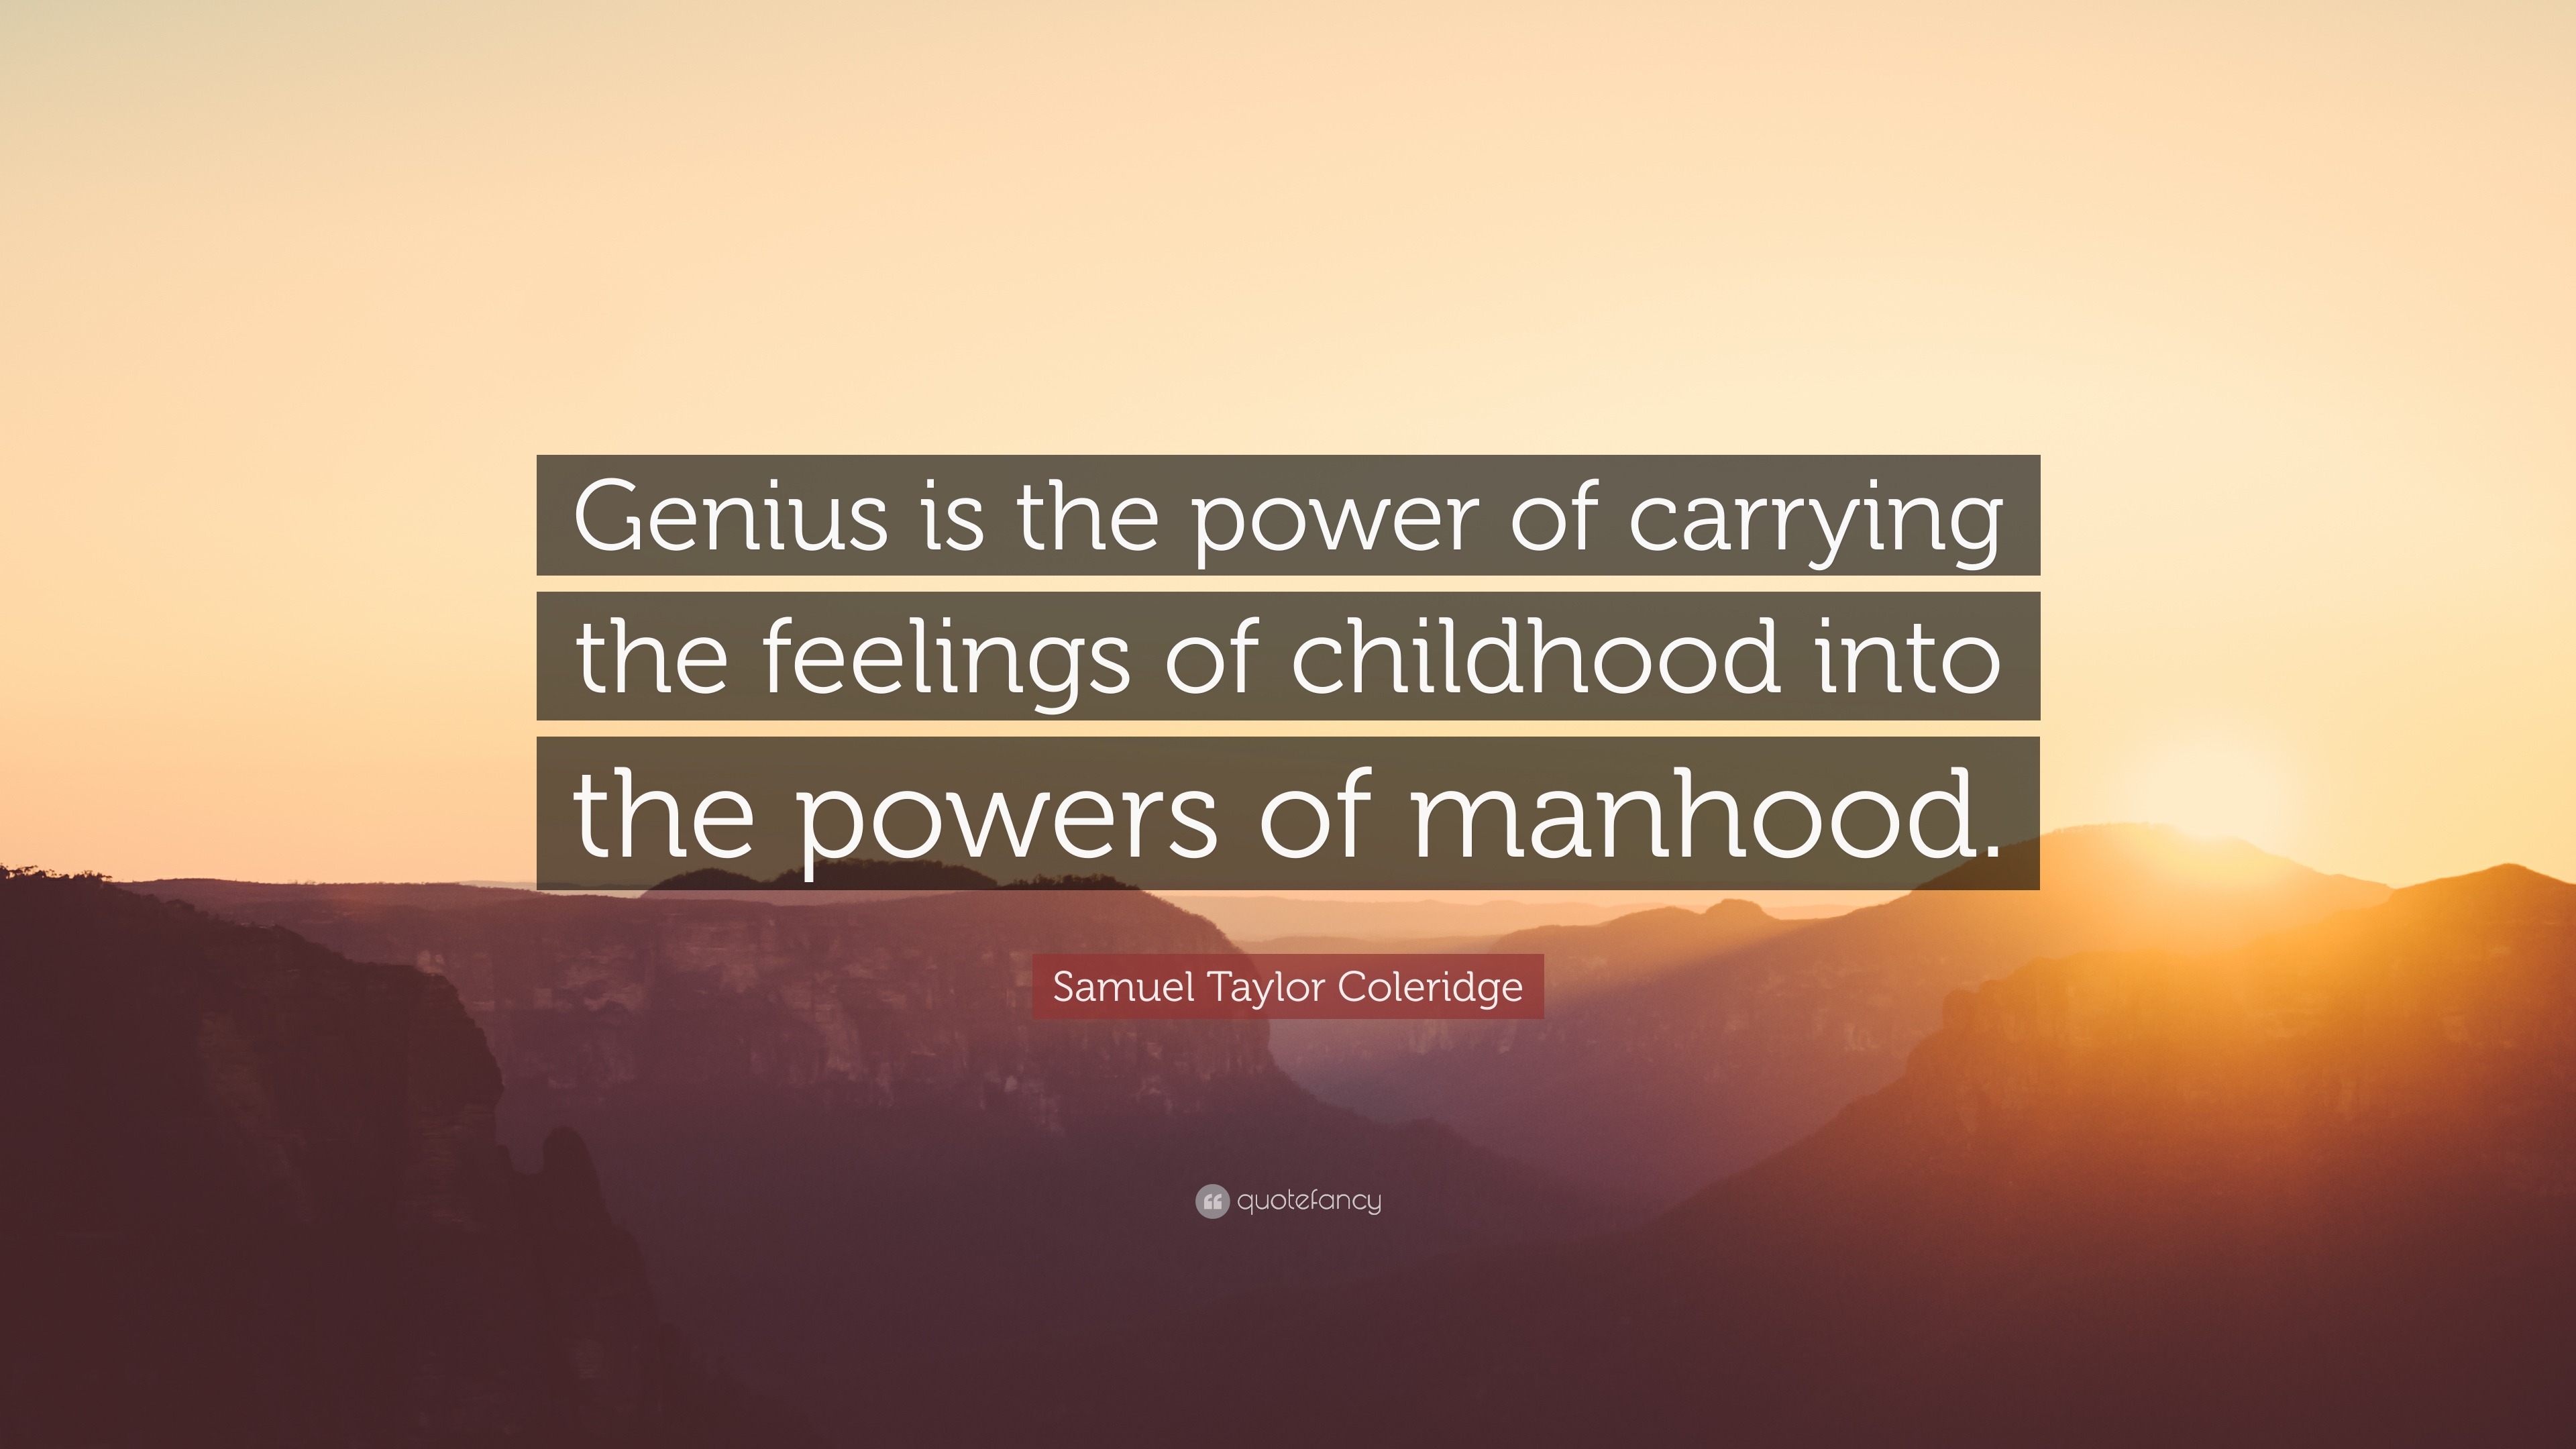 Samuel Taylor Coleridge Quote: “Genius is the power of carrying the feelings of ...